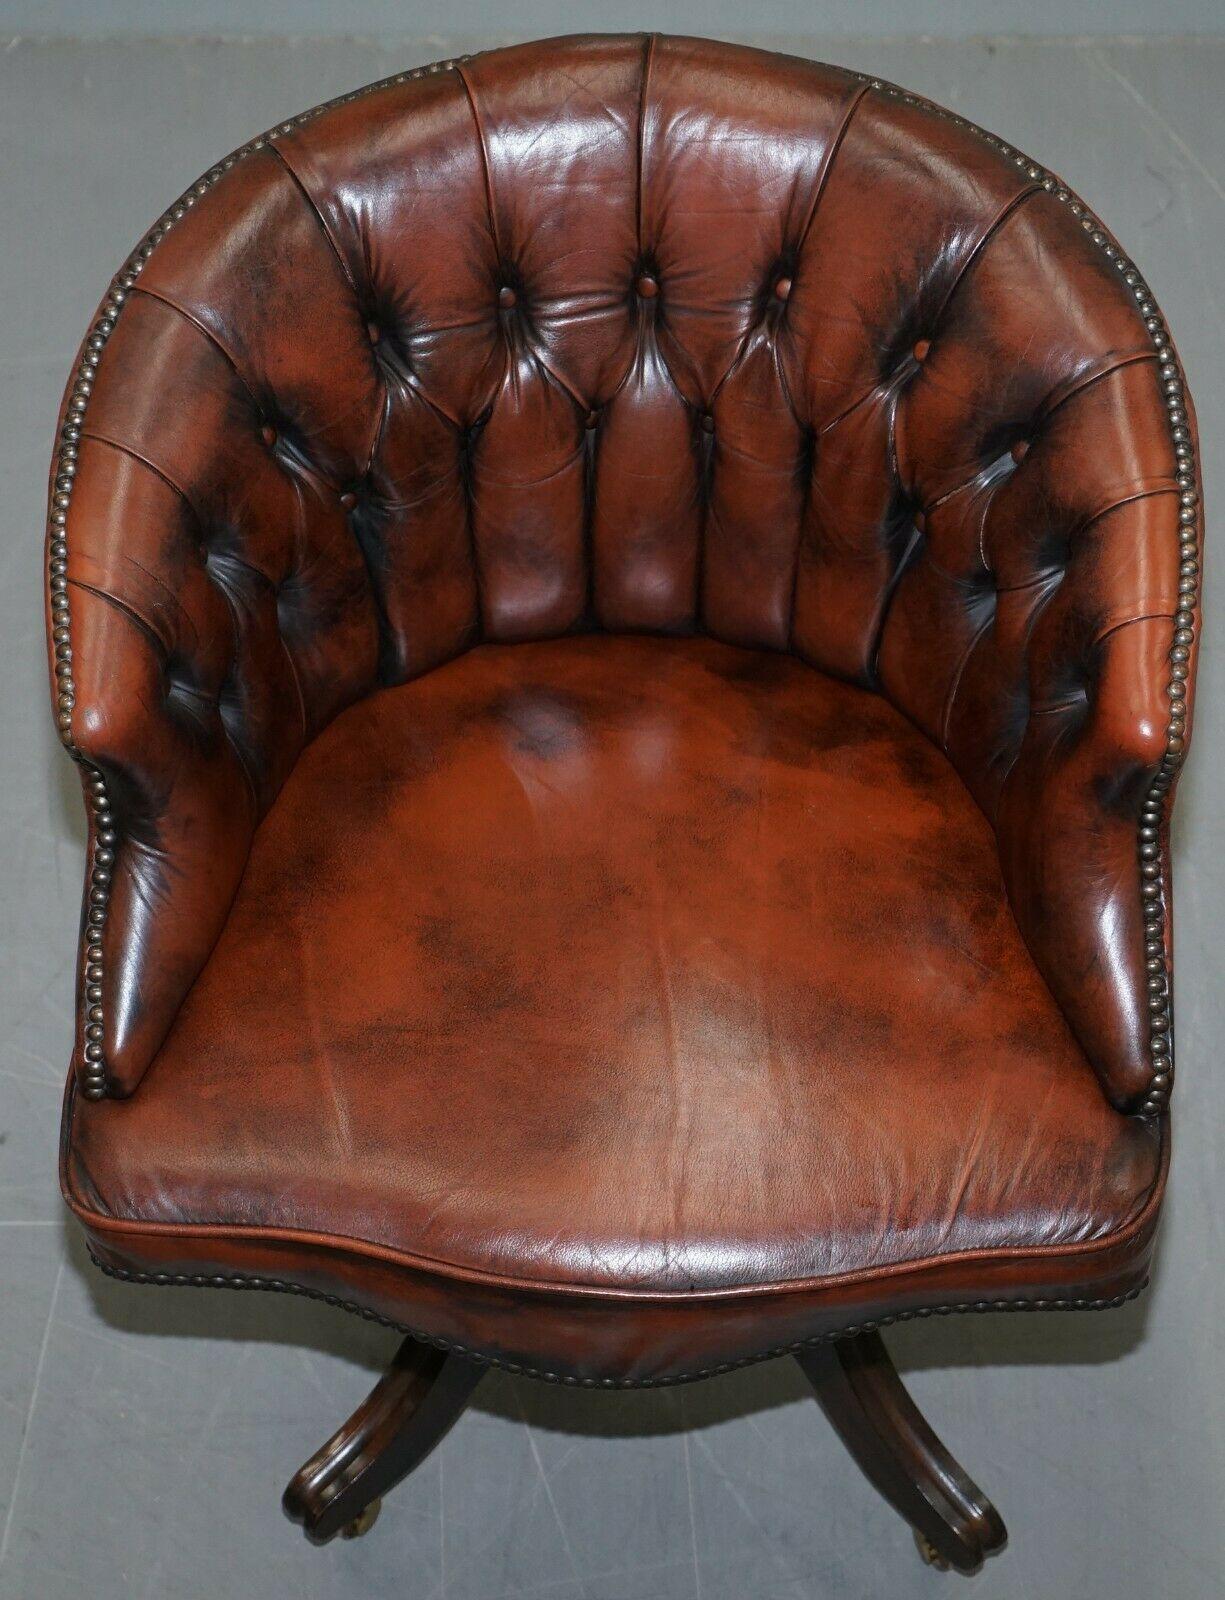 We are delighted to this handmade in England 1967 stamped Chesterfield hand dyed brown leather curved back captains chair

This chair is one of a pair, the other is listed under my other items, the only difference is this has a large metal dome on